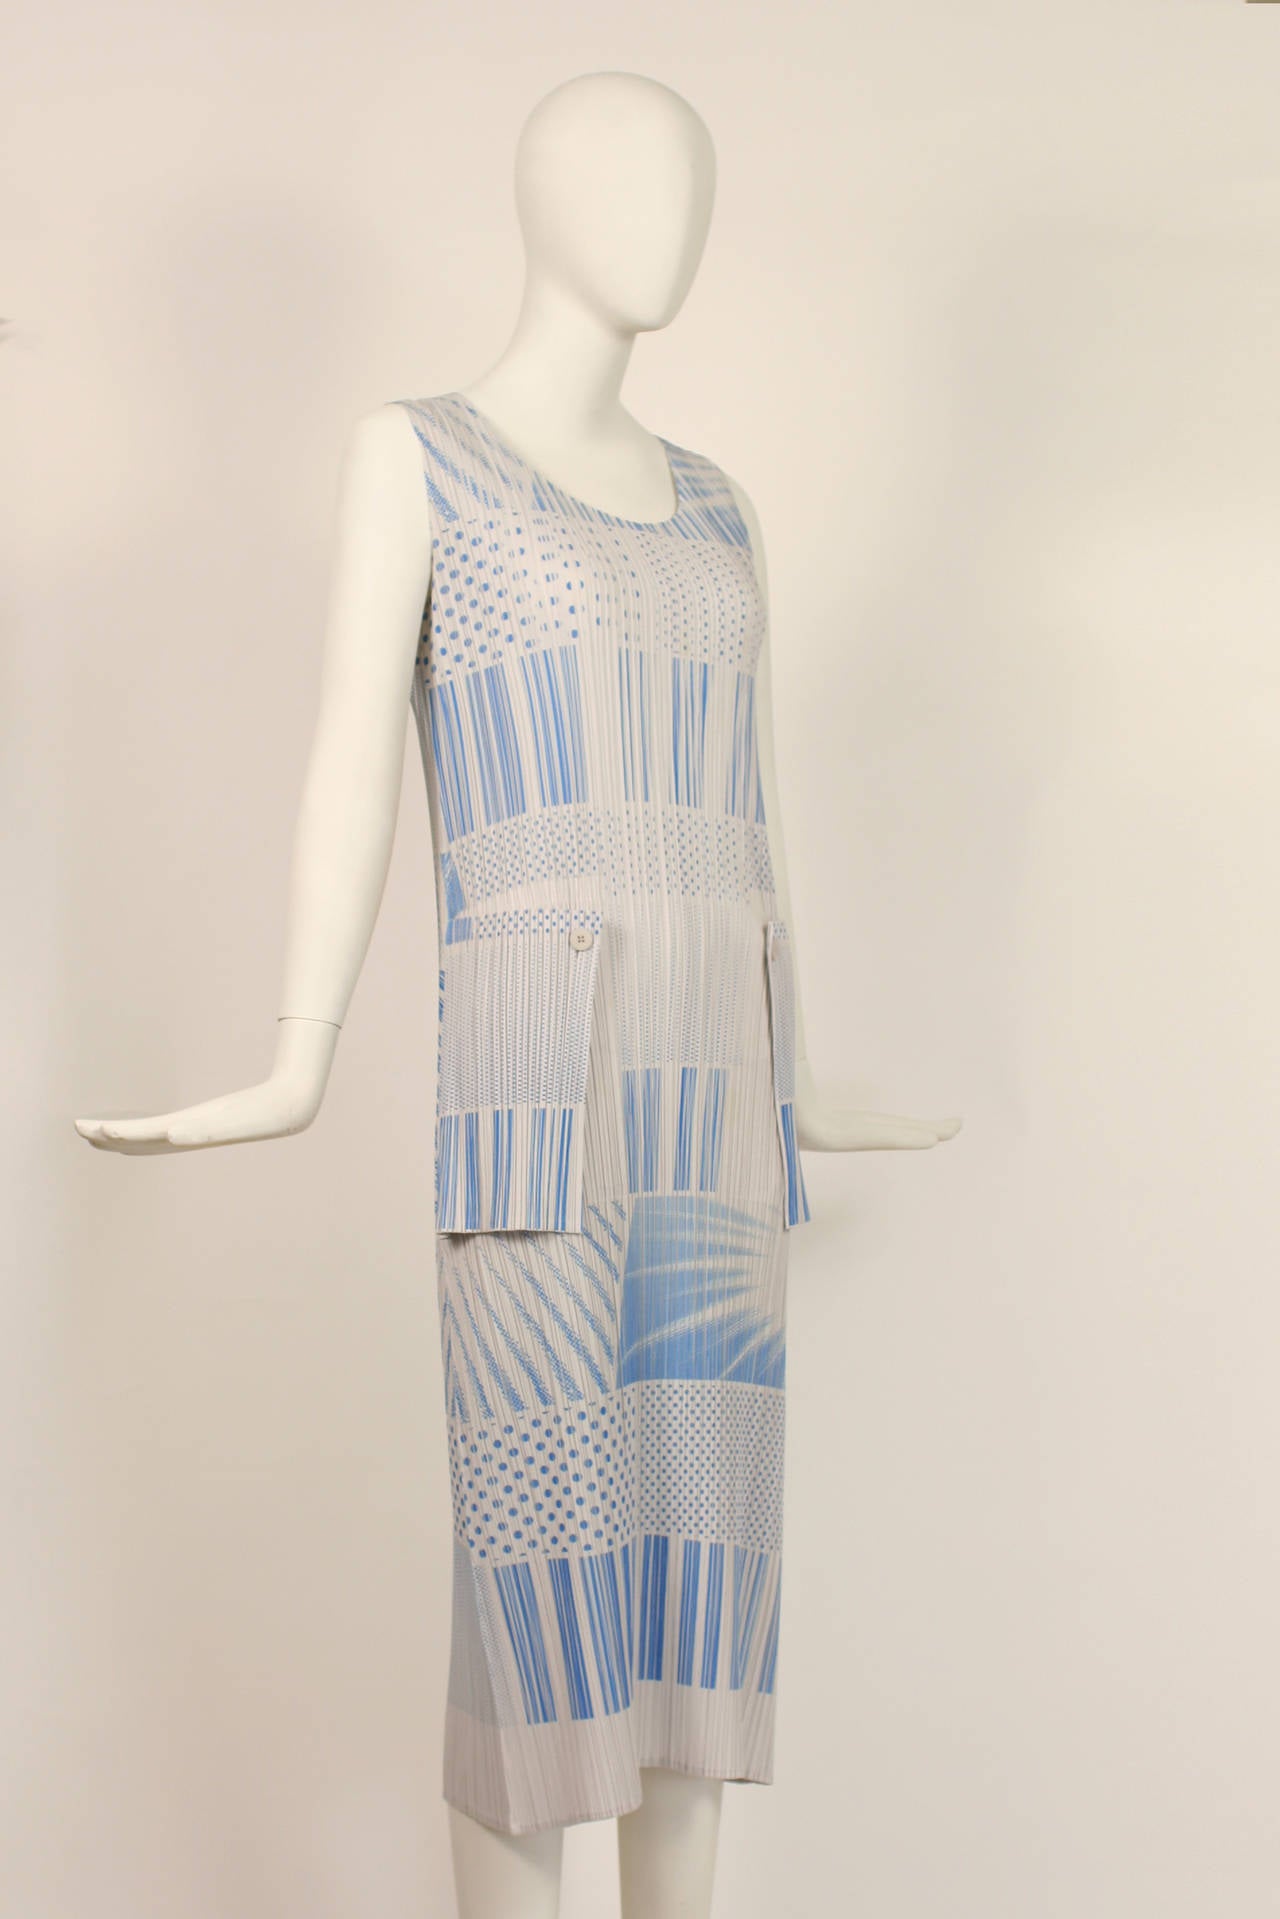 Pleats Please Issey Miyake Blue and White Summer Dress
Excellent condition and will fit xs to medium sizes.